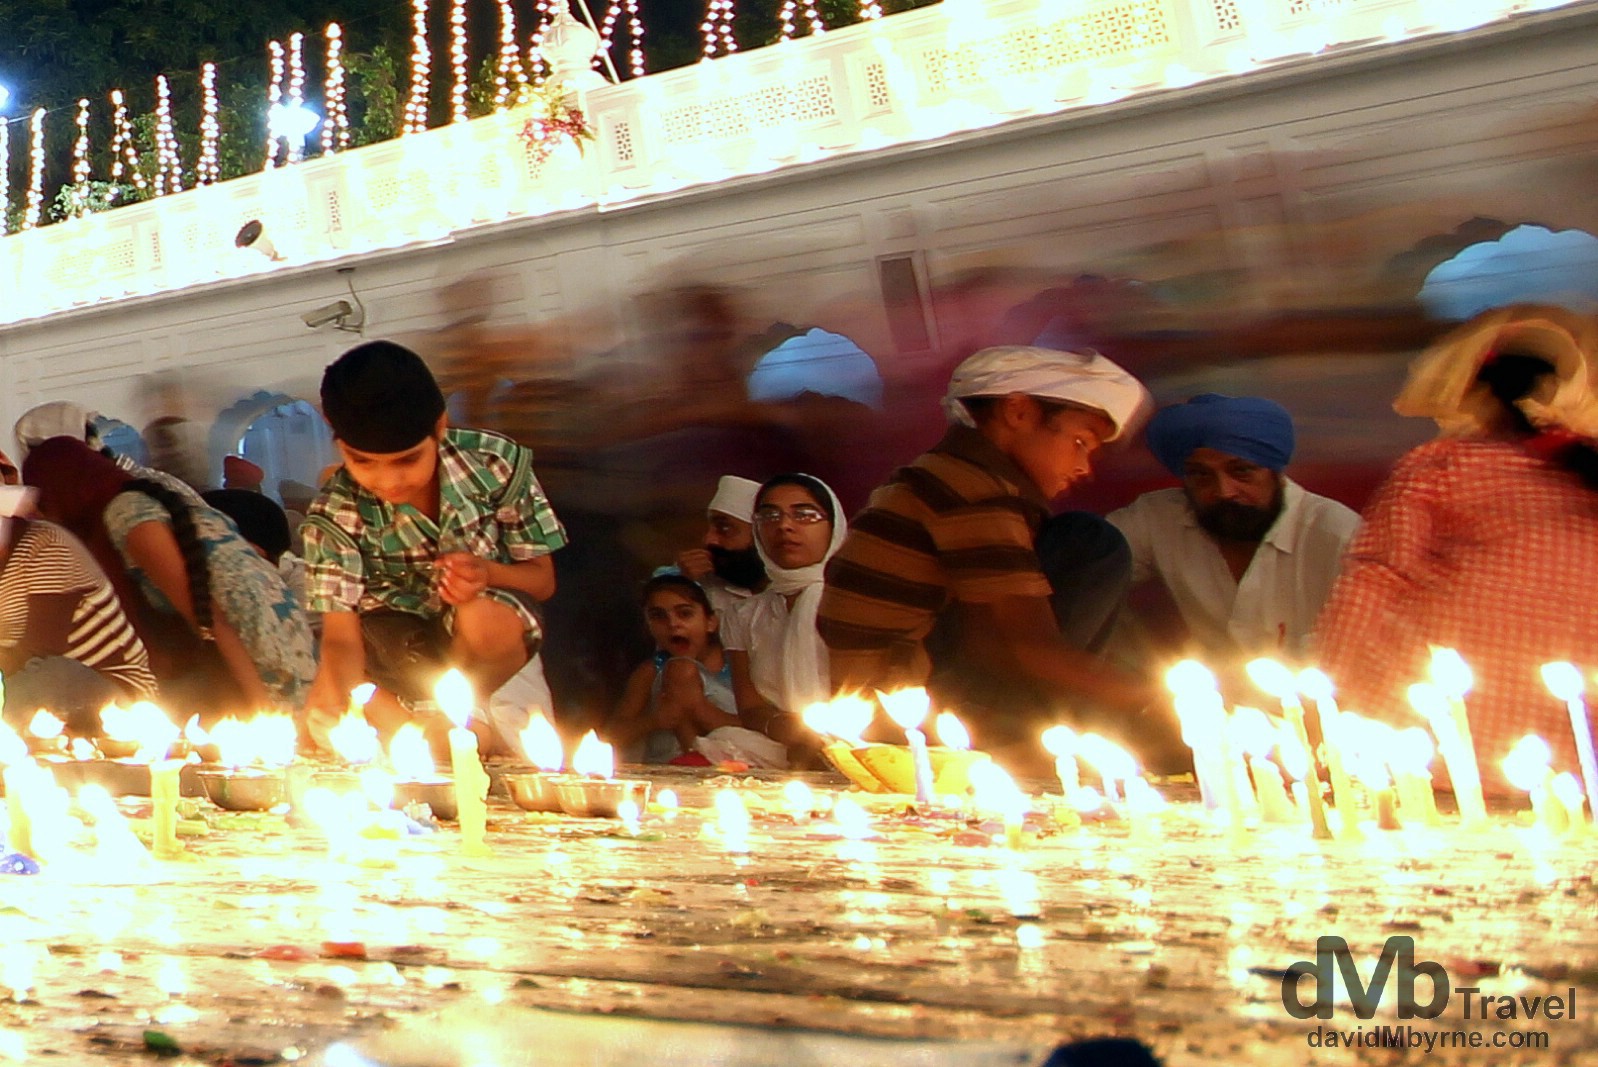 Lighting candles by the edge of the Amrit Sarovar (Pool of Nectar) in the Golden Temple complex, Amritsar, India. October 9th 2012.